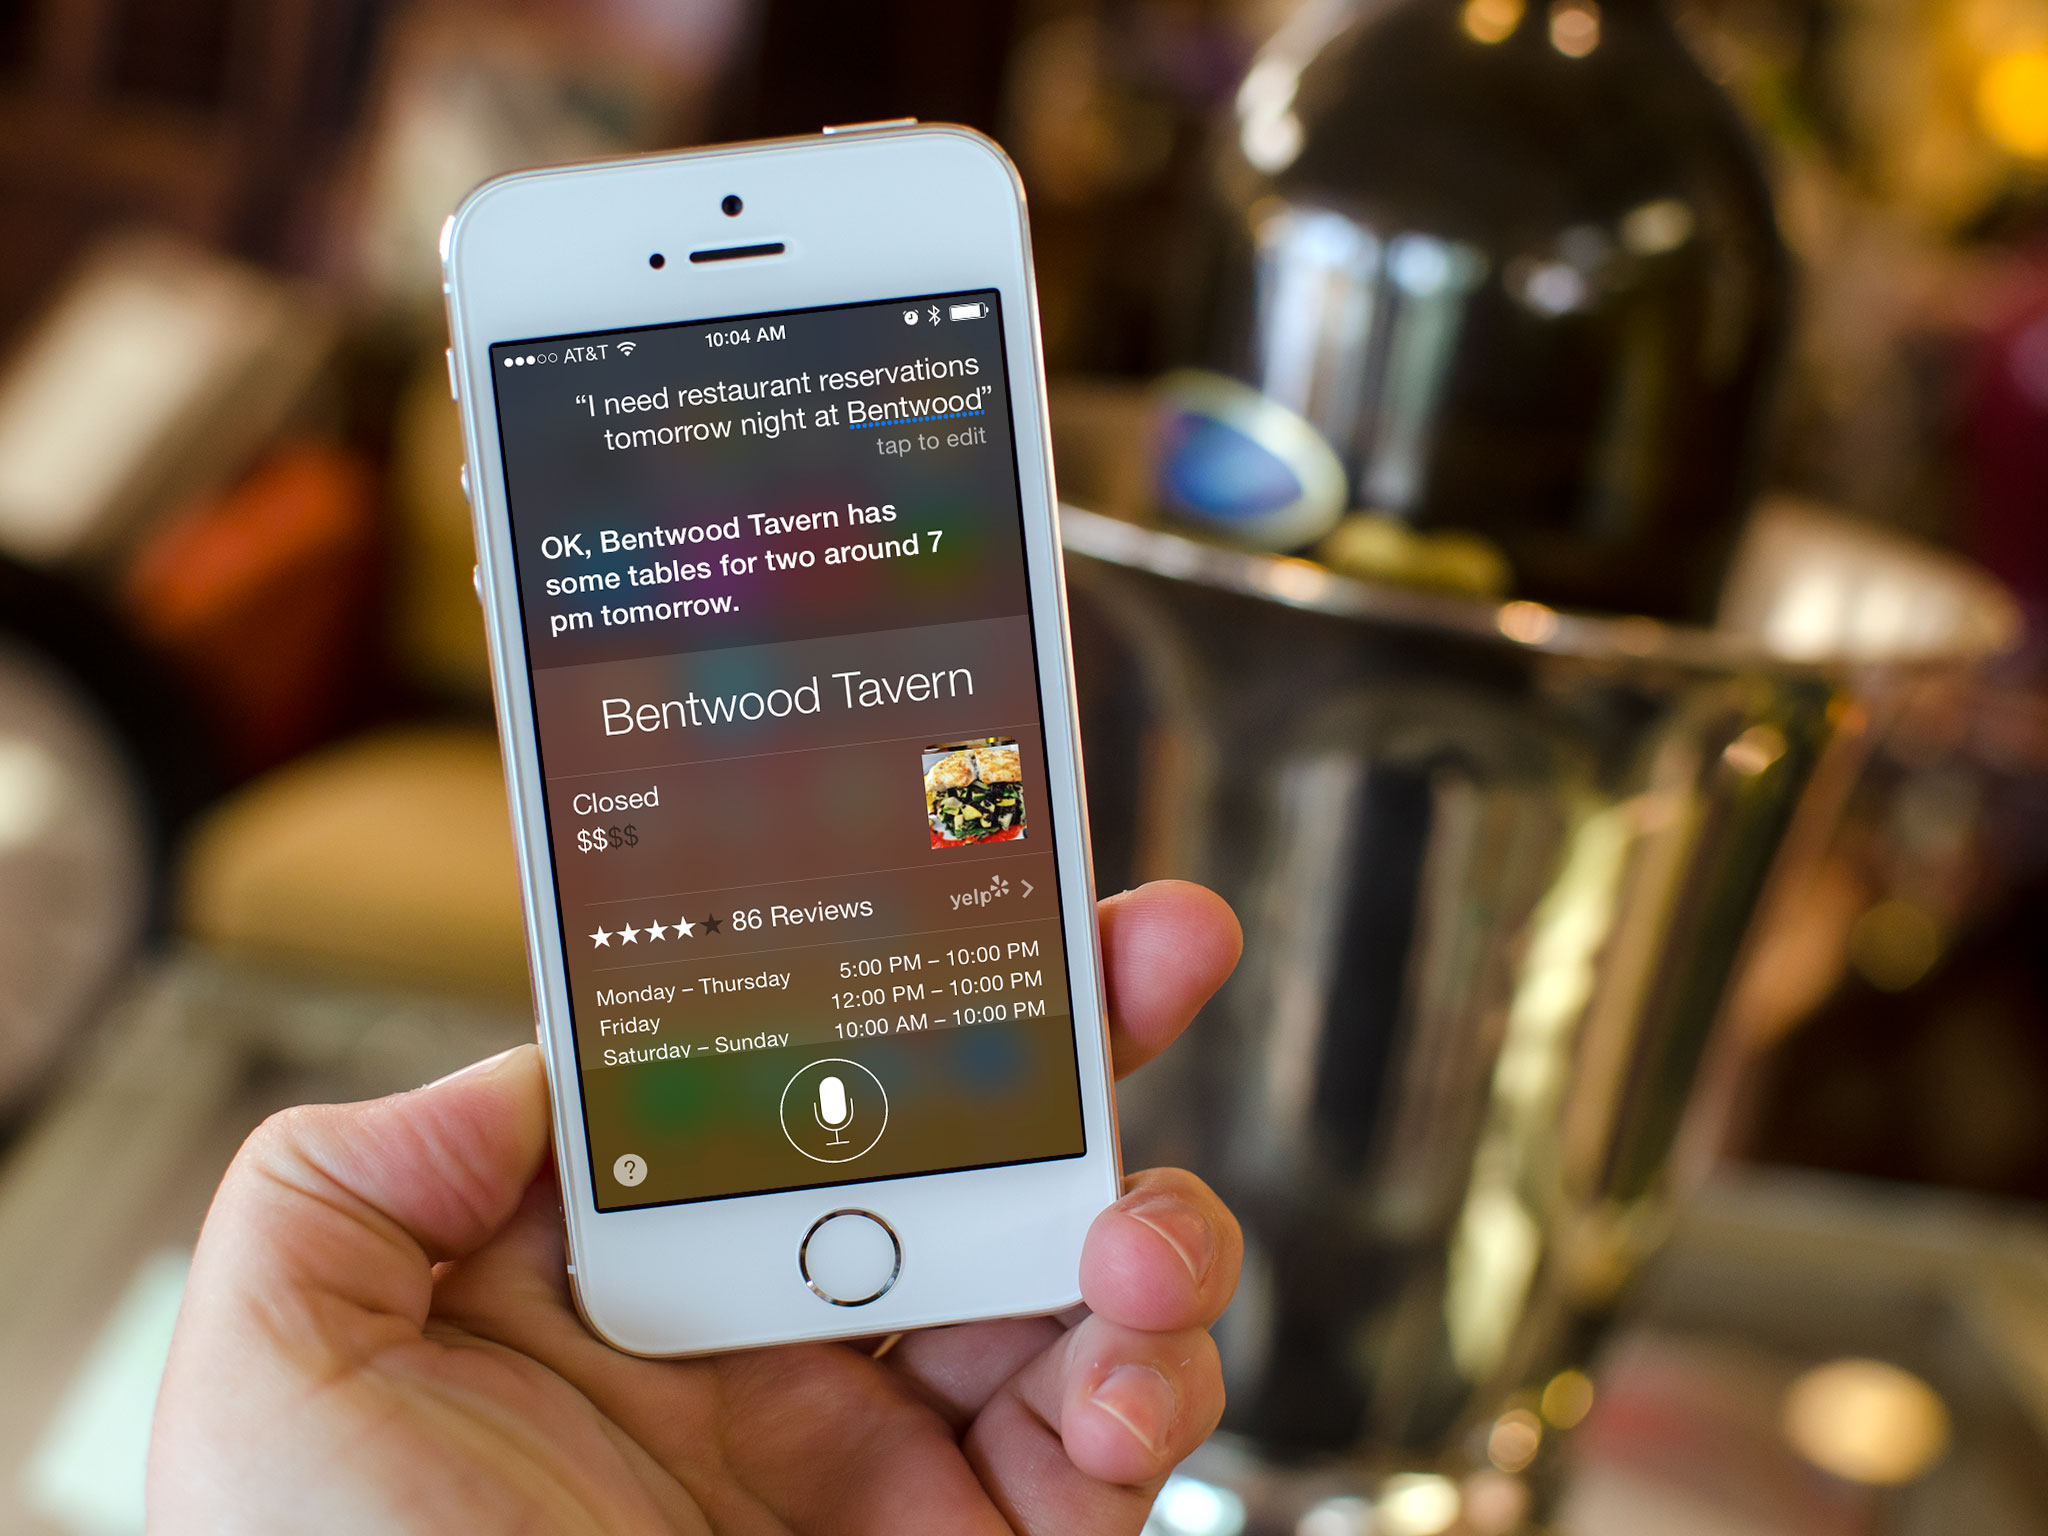 How to make restaurant reservations on iPhone and iPad with Siri